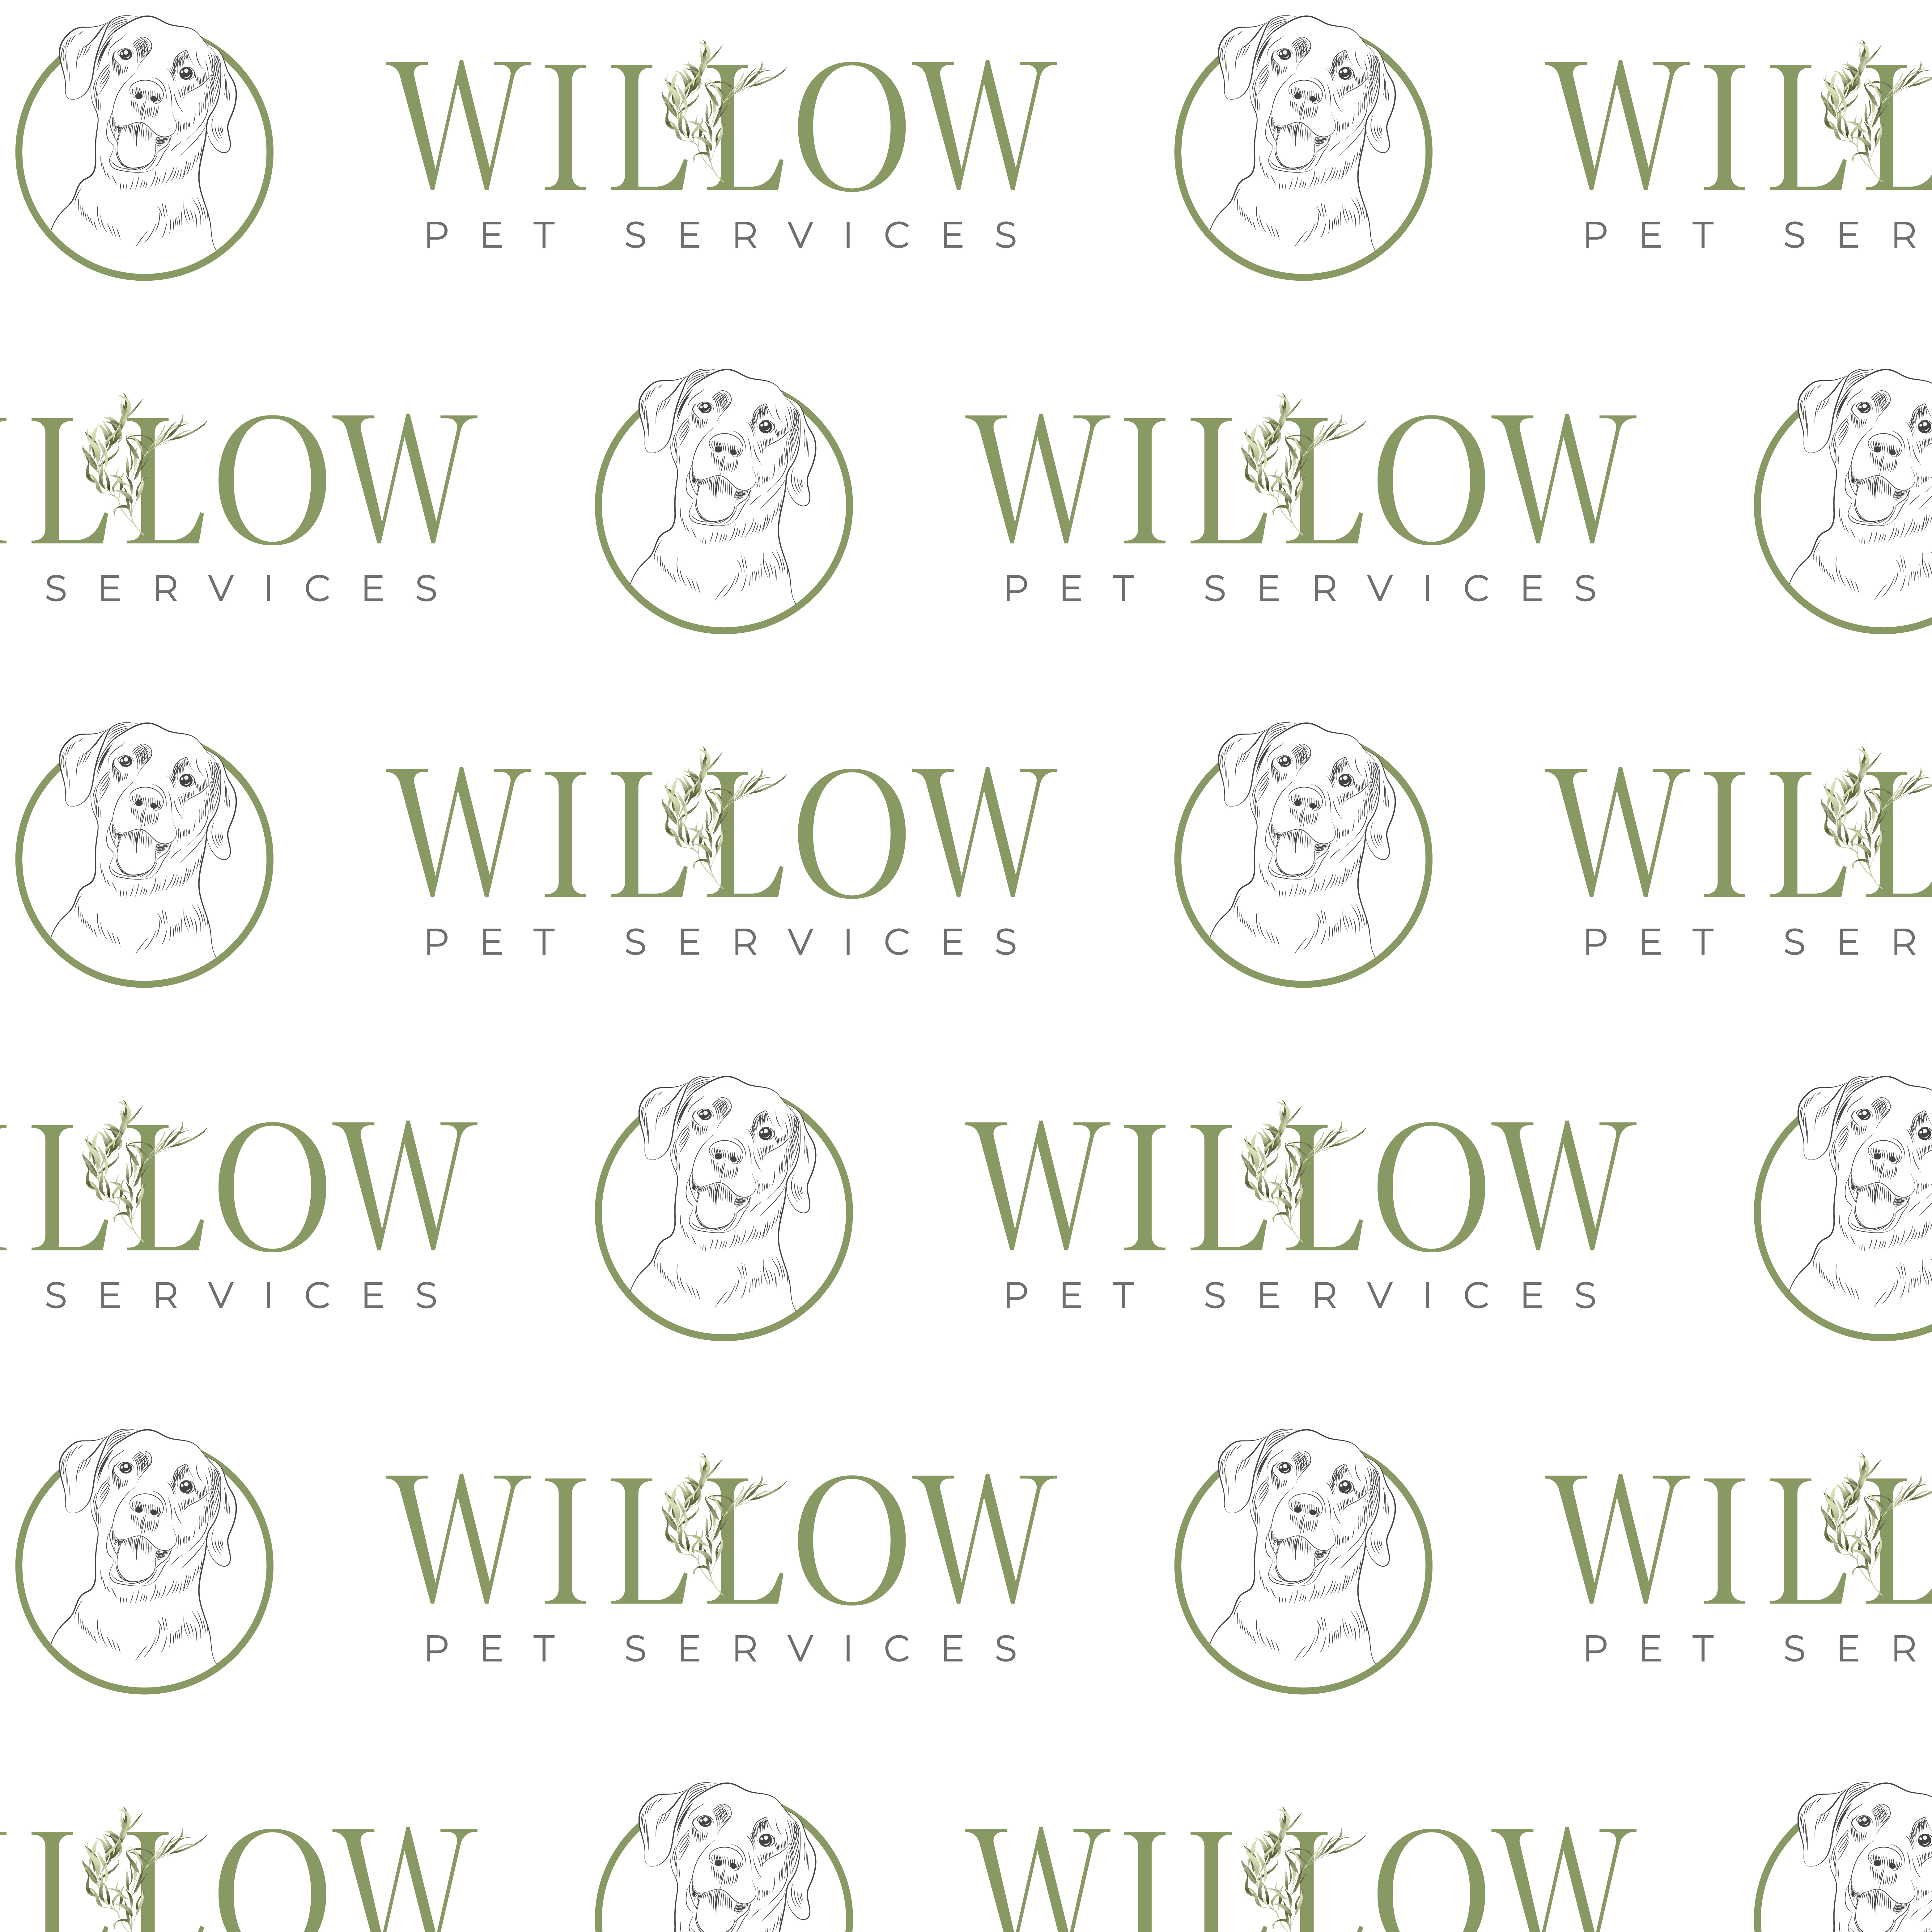 r44-willow-pet-services-pattern-01---copy-1635725542576.jpg